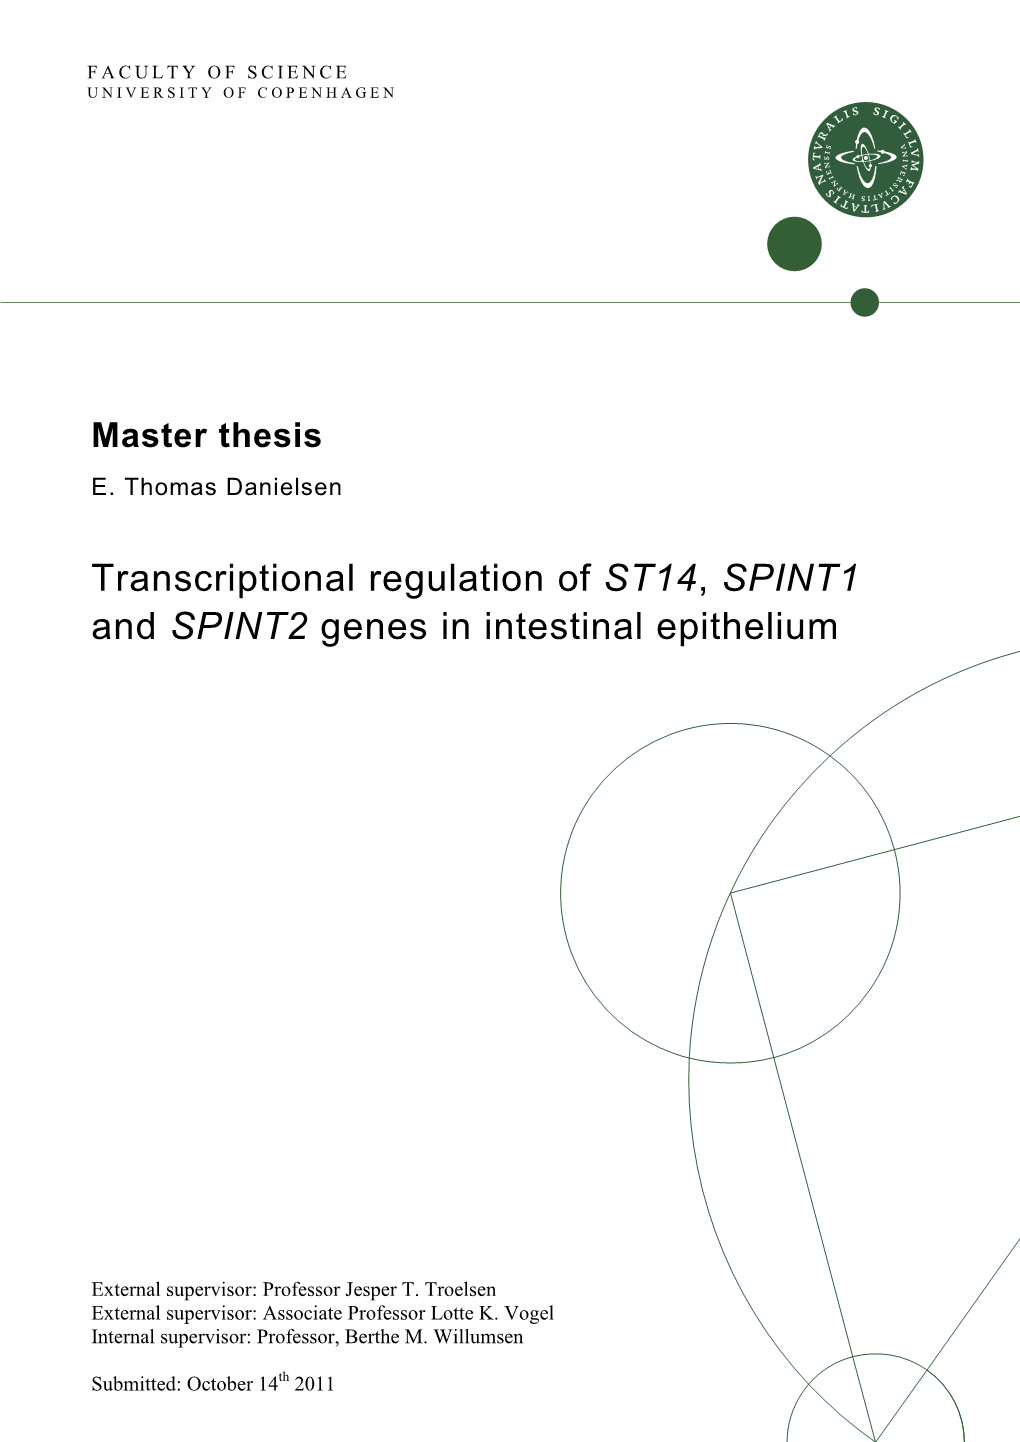 Transcriptional Regulation of ST14, SPINT1 and SPINT2 Genes in Intestinal Epithelium